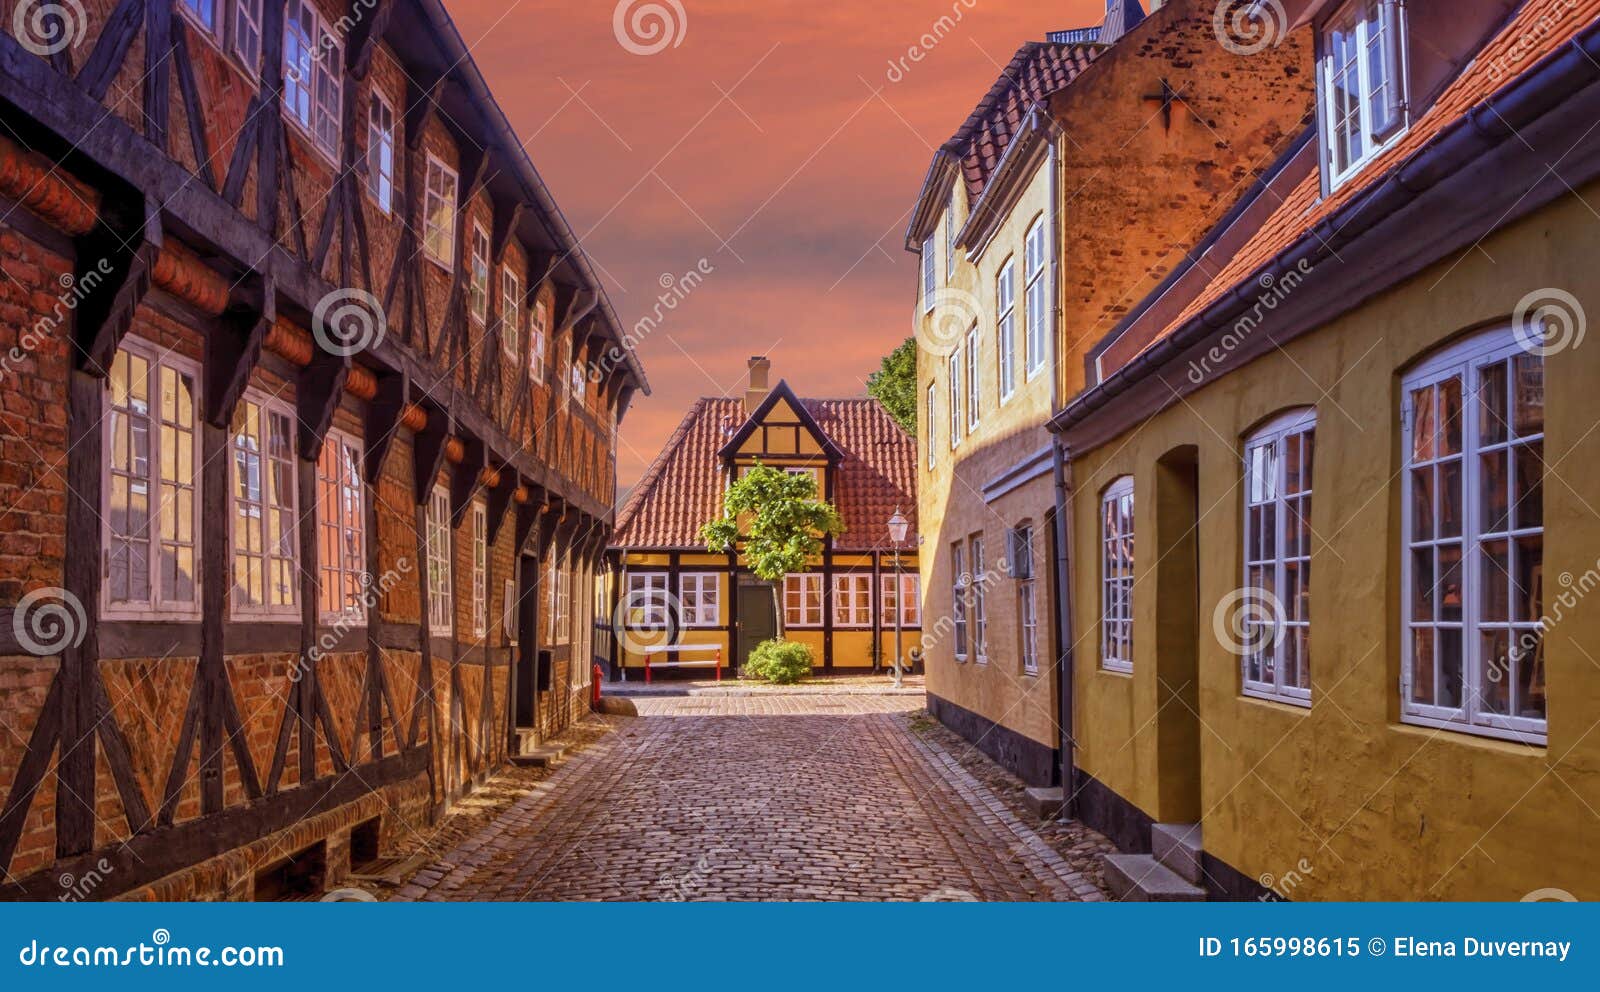 street and houses in ribe town, denmark